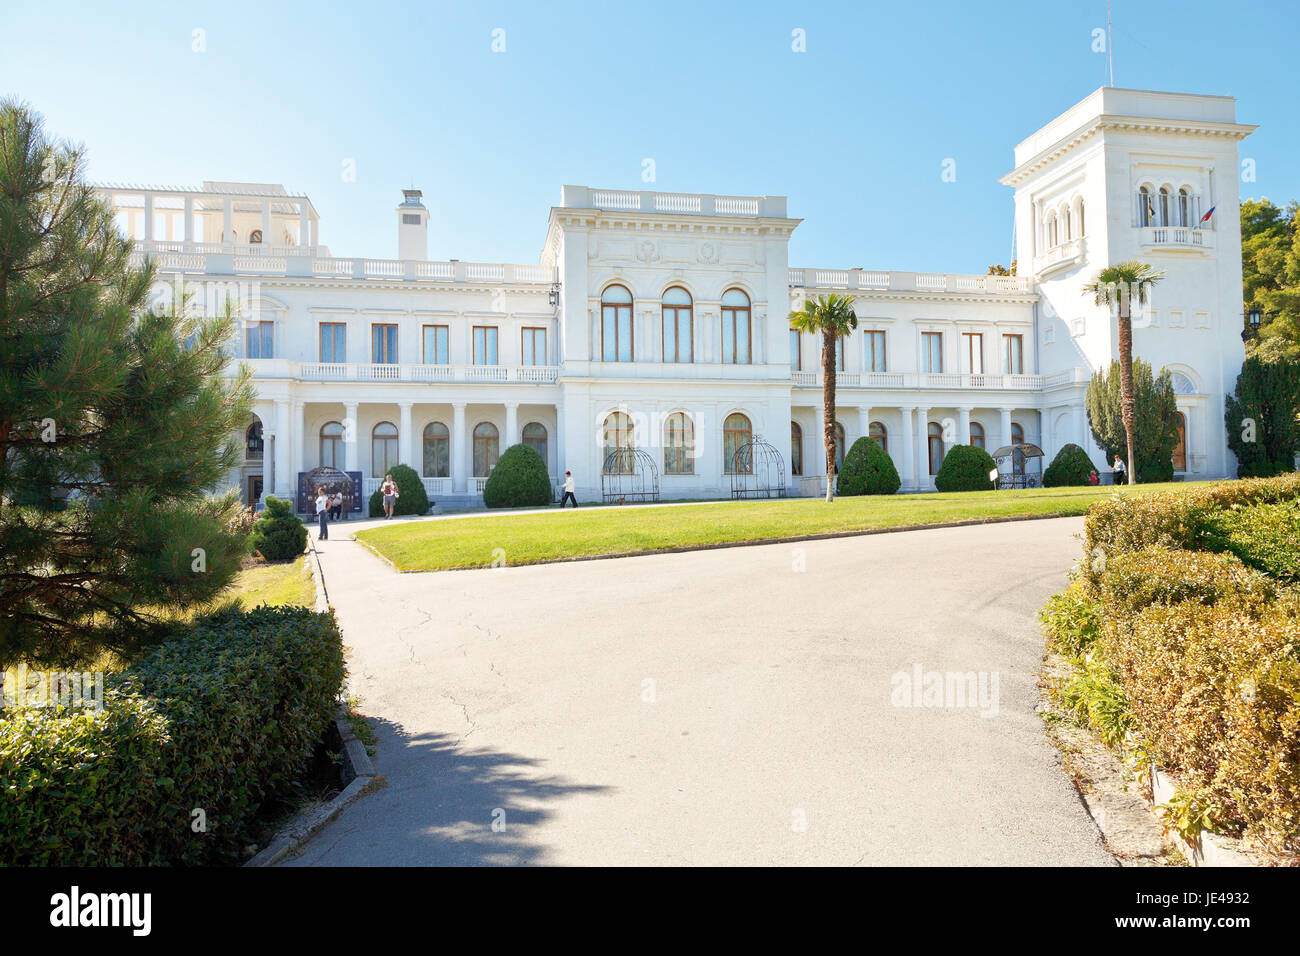 YALTA, RUSSIA - SEPTEMBER 30, 2014: facade of Grand Livadia Palace in Crimea. Livadia estate was summer residence of the Russian imperial family from 1860. Stock Photo